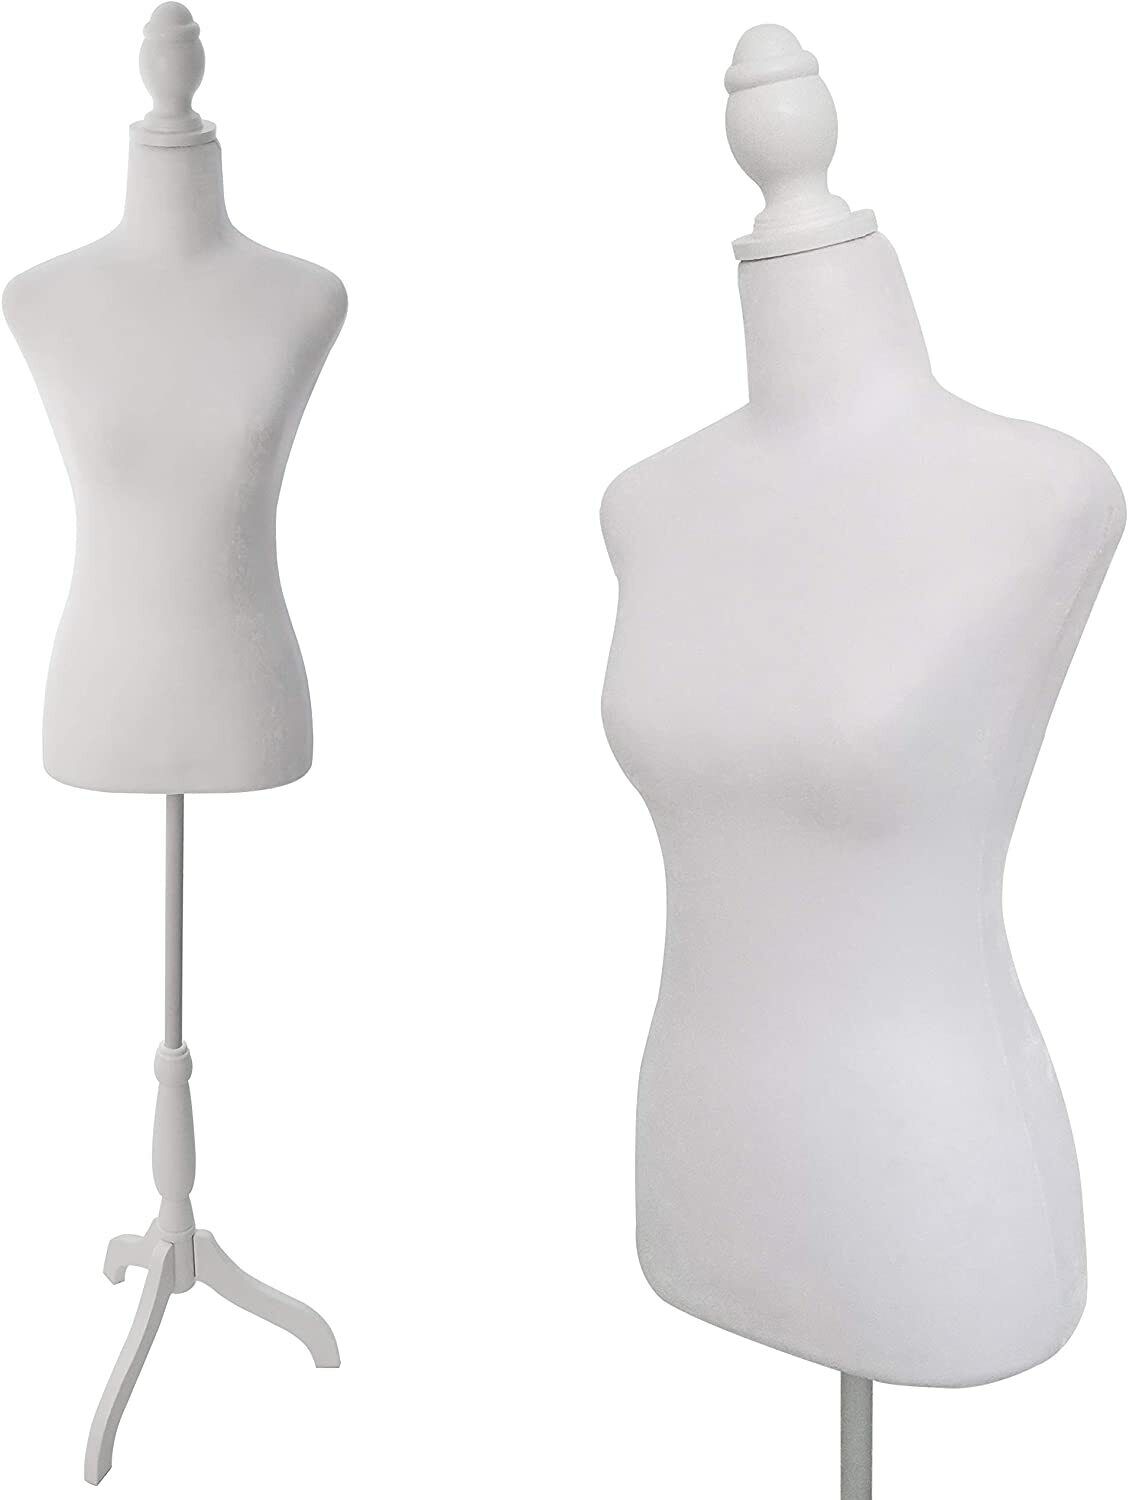 Female Mannequin Torso Dress Clothing Form Display Body Tripod Stand